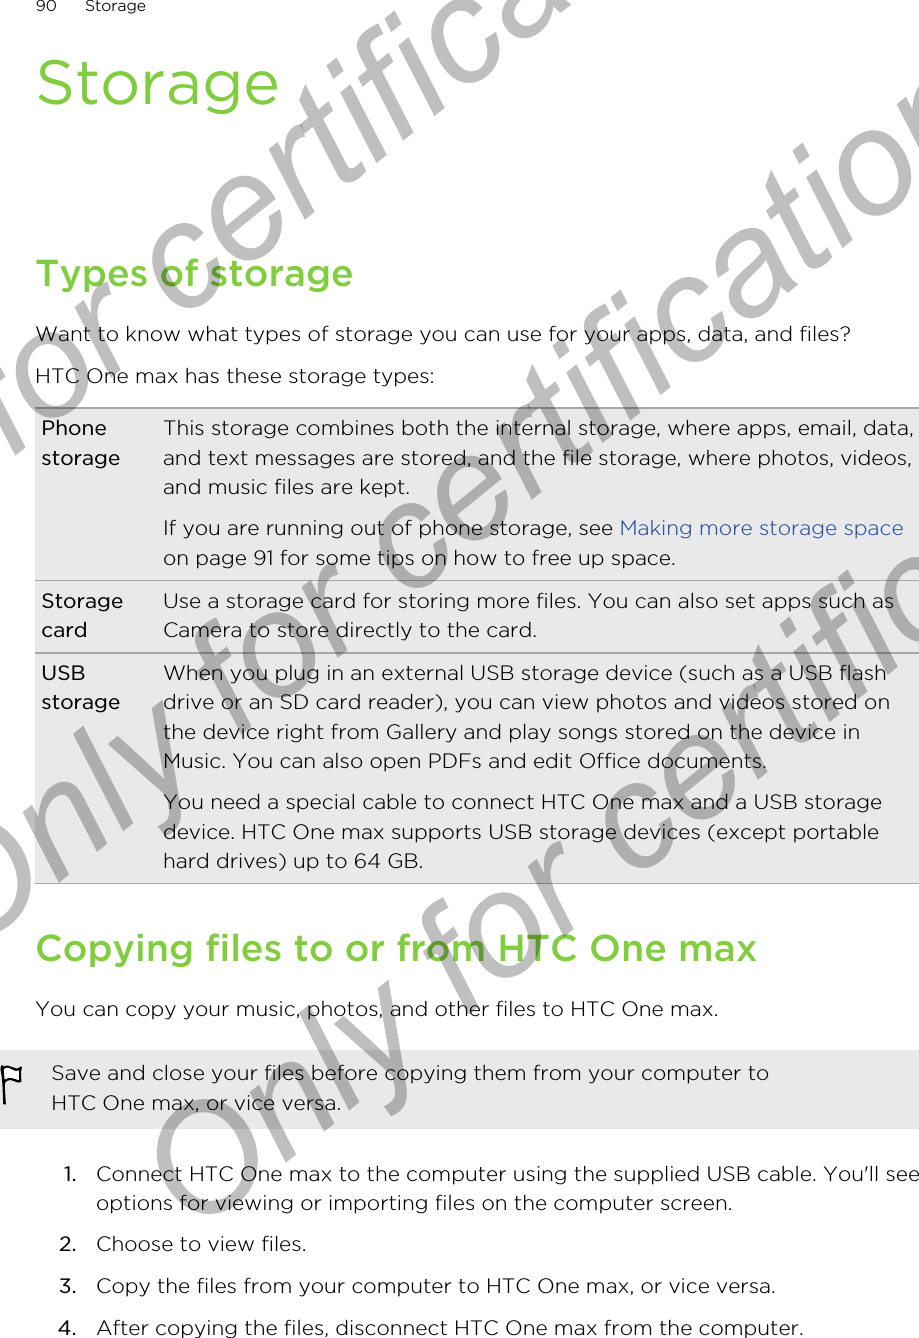 StorageTypes of storageWant to know what types of storage you can use for your apps, data, and files?HTC One max has these storage types:PhonestorageThis storage combines both the internal storage, where apps, email, data,and text messages are stored, and the file storage, where photos, videos,and music files are kept.If you are running out of phone storage, see Making more storage spaceon page 91 for some tips on how to free up space.StoragecardUse a storage card for storing more files. You can also set apps such asCamera to store directly to the card.USBstorageWhen you plug in an external USB storage device (such as a USB flashdrive or an SD card reader), you can view photos and videos stored onthe device right from Gallery and play songs stored on the device inMusic. You can also open PDFs and edit Office documents.You need a special cable to connect HTC One max and a USB storagedevice. HTC One max supports USB storage devices (except portablehard drives) up to 64 GB.Copying files to or from HTC One maxYou can copy your music, photos, and other files to HTC One max.Save and close your files before copying them from your computer toHTC One max, or vice versa.1. Connect HTC One max to the computer using the supplied USB cable. You&apos;ll seeoptions for viewing or importing files on the computer screen.2. Choose to view files.3. Copy the files from your computer to HTC One max, or vice versa.4. After copying the files, disconnect HTC One max from the computer.90 StorageOnly for certification  Only for certification  Only for certification